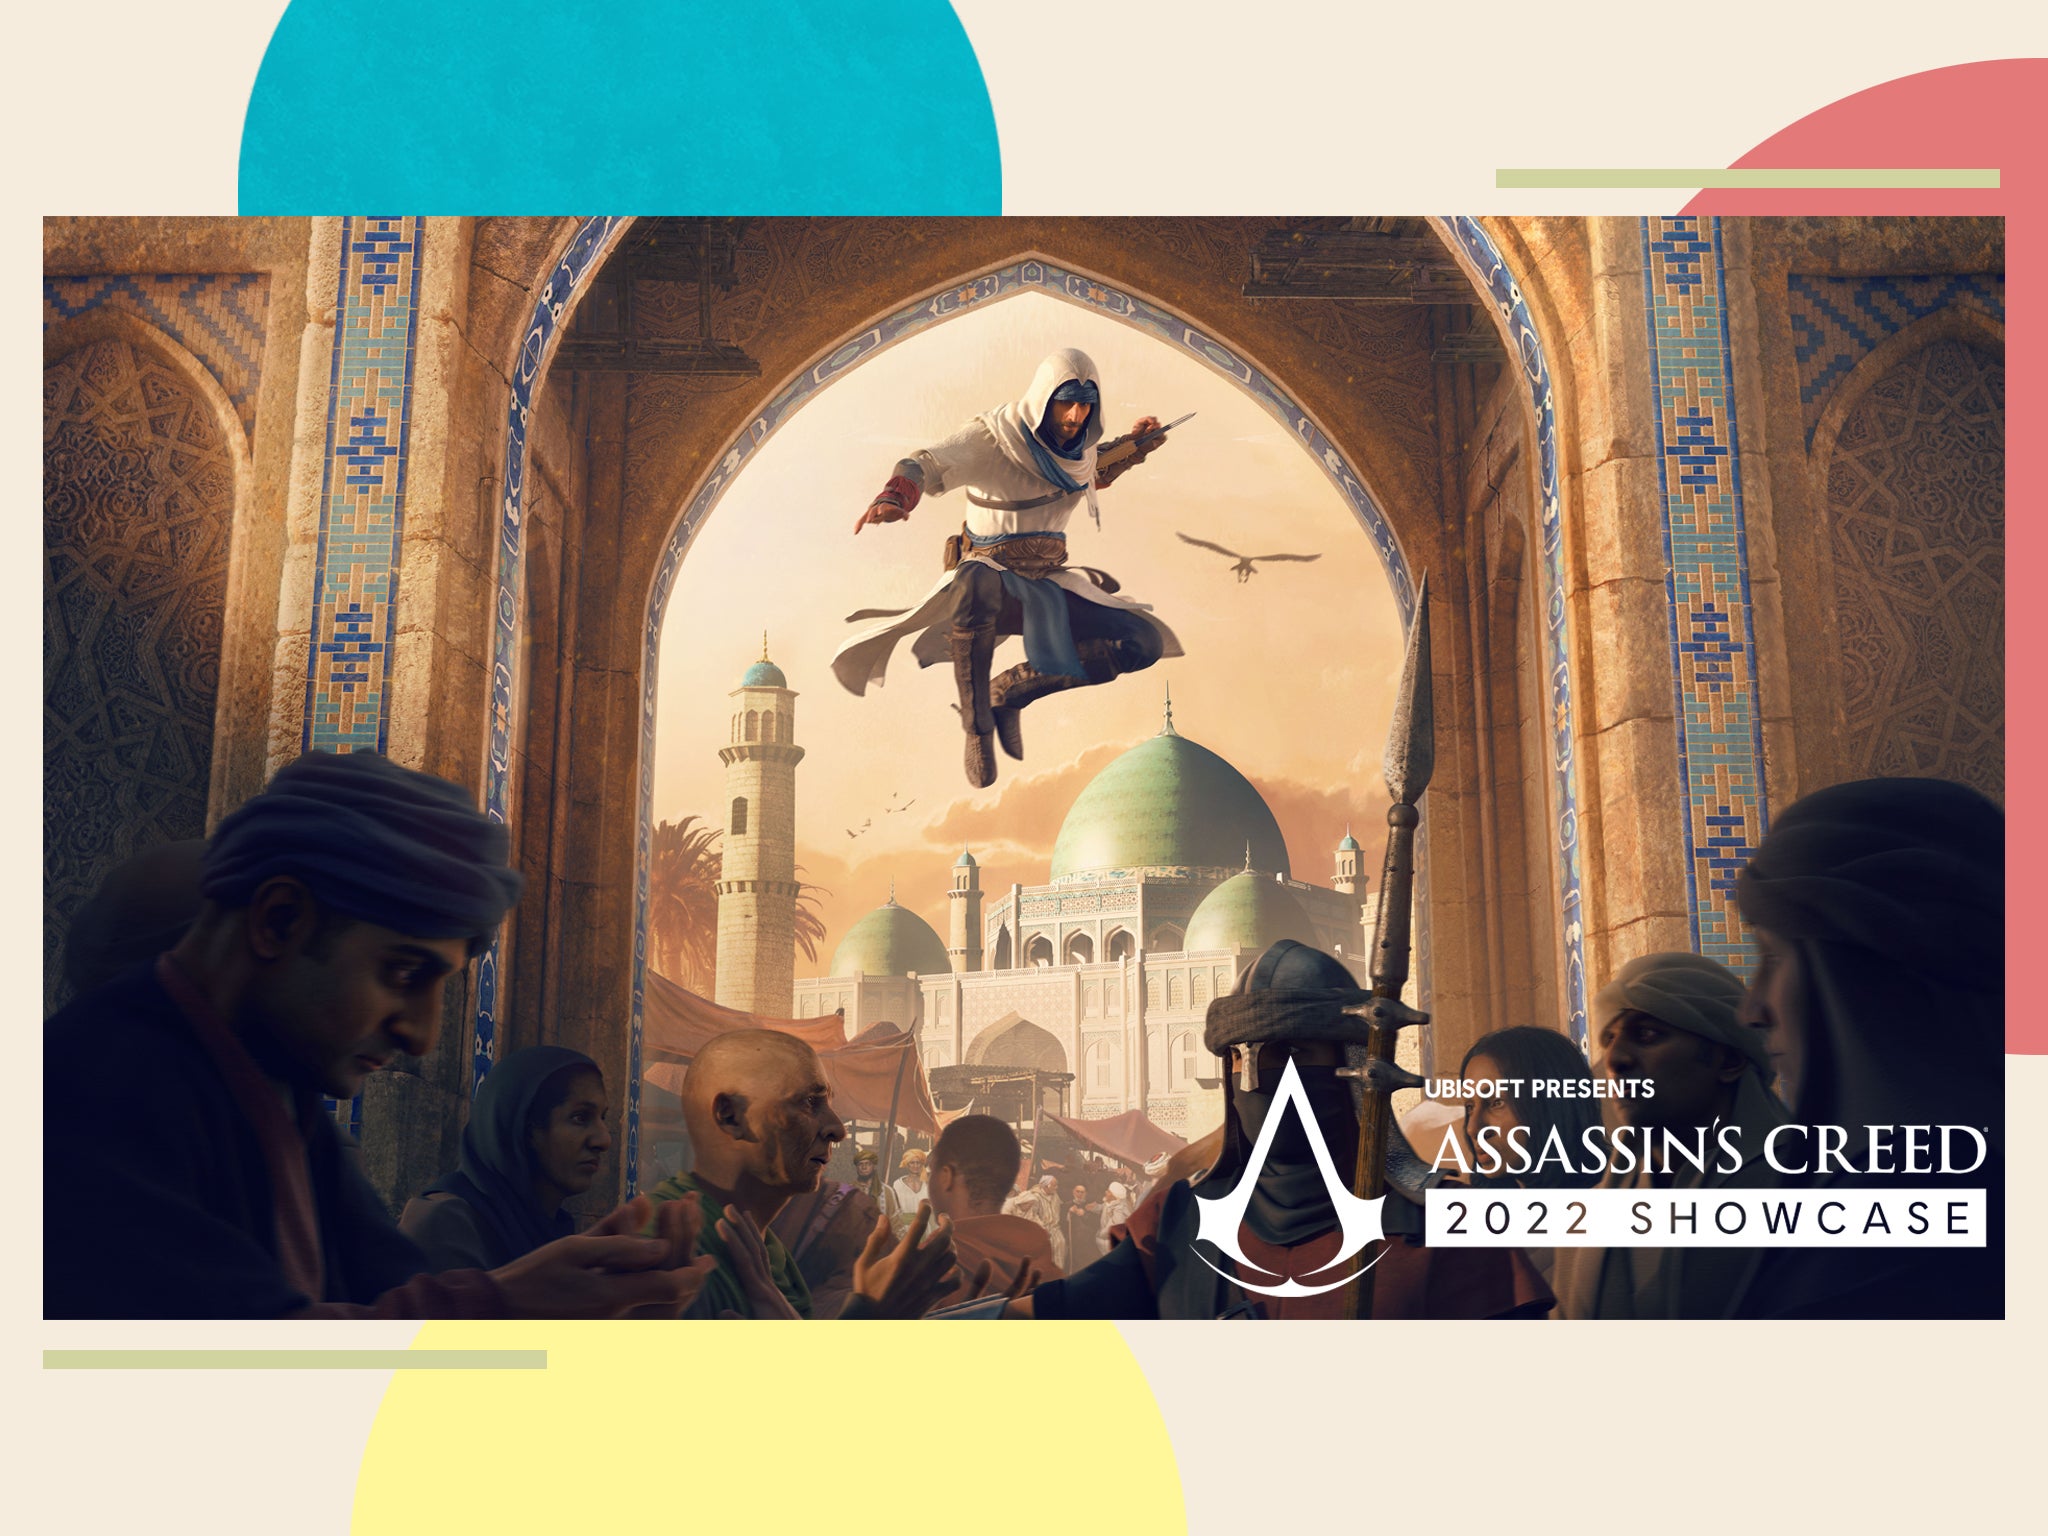 Assassin's Creed Mirage will have a History of Baghdad codex feature for  those that want to learn about the city and setting.